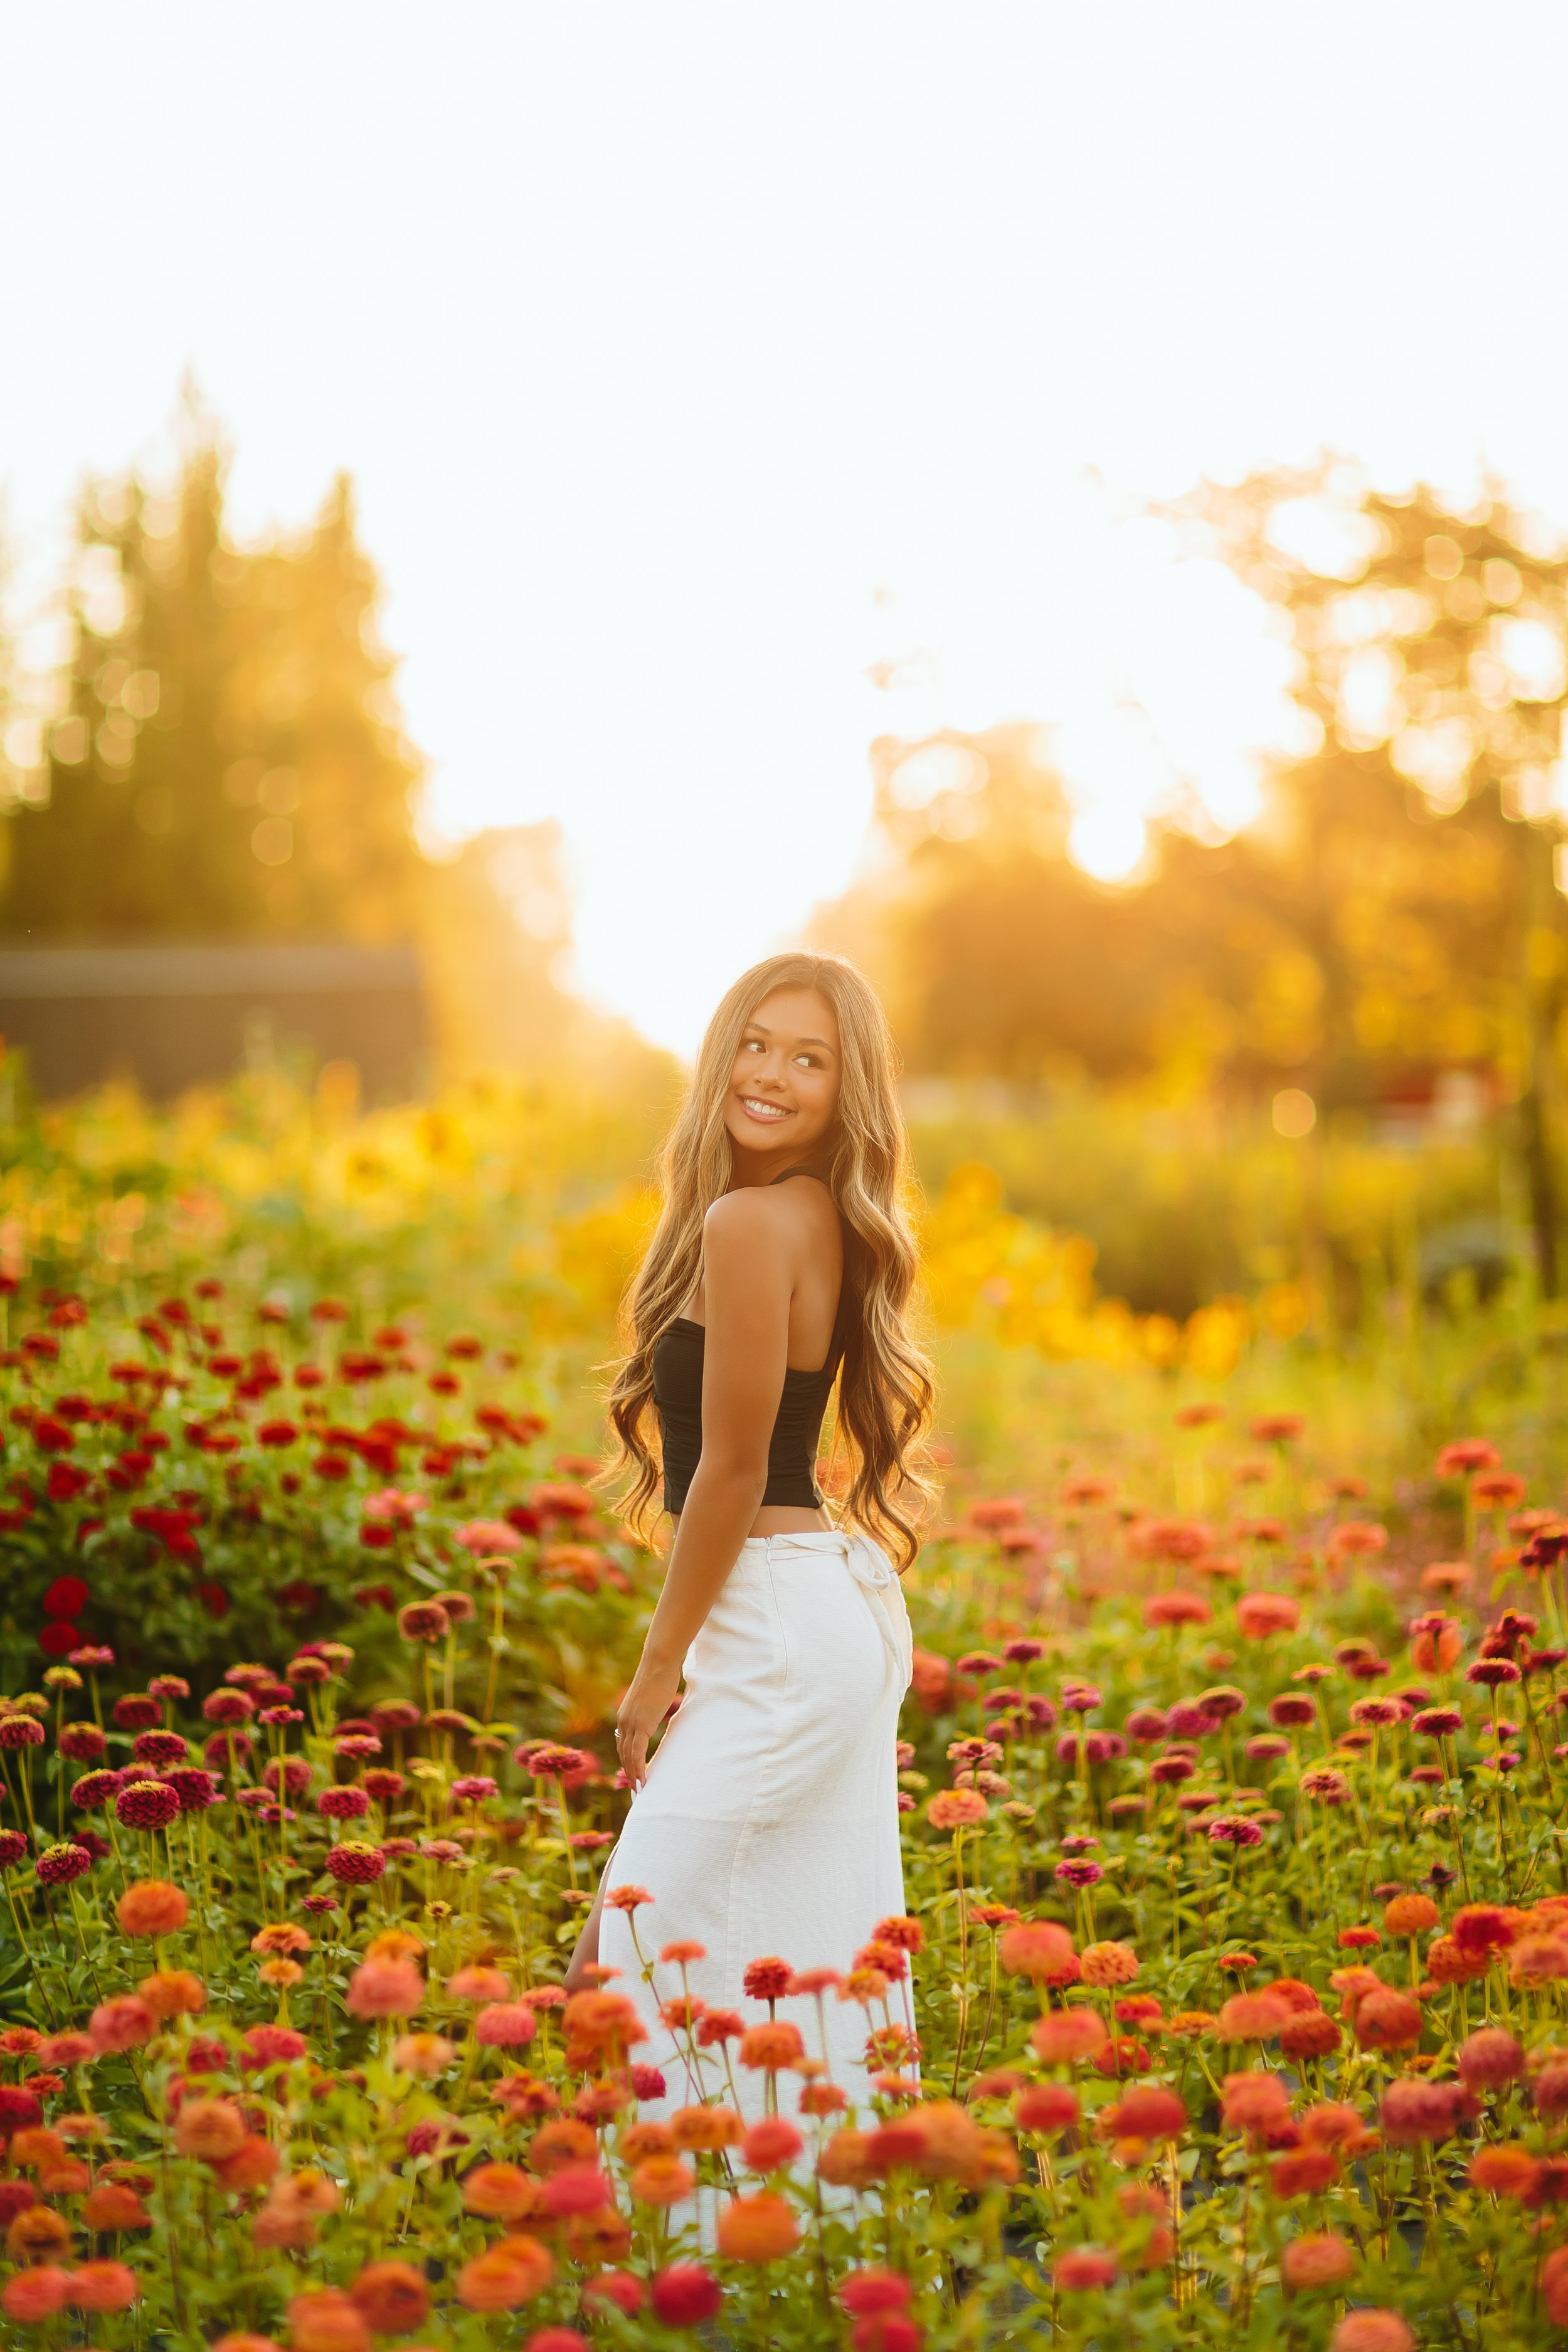 Adorable Girl Flowers Poses Field During Stock Photo 70247461 | Shutterstock